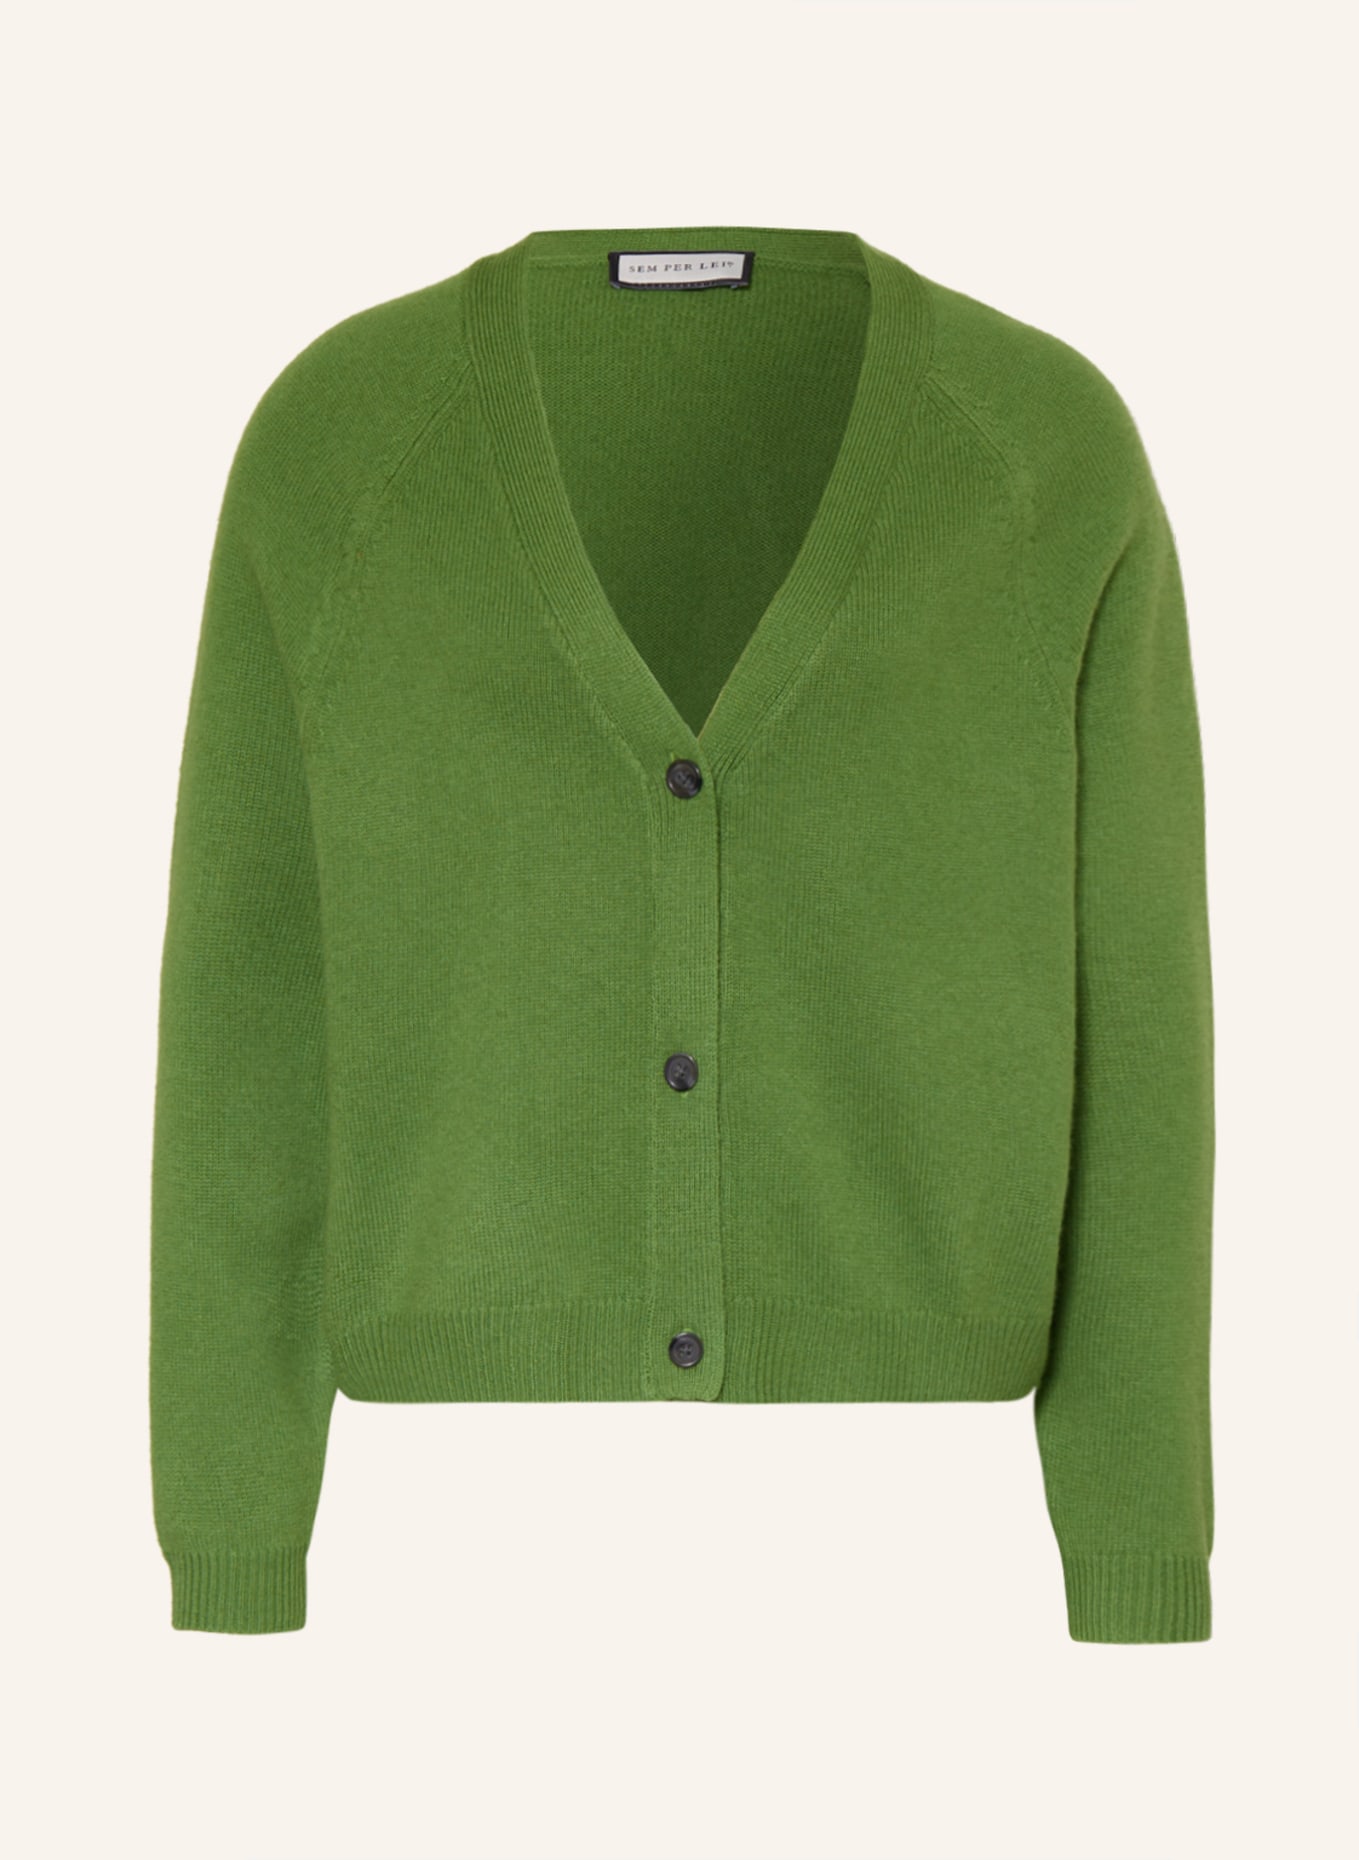 SEM PER LEI Cardigan with cashmere, Color: GREEN (Image 1)